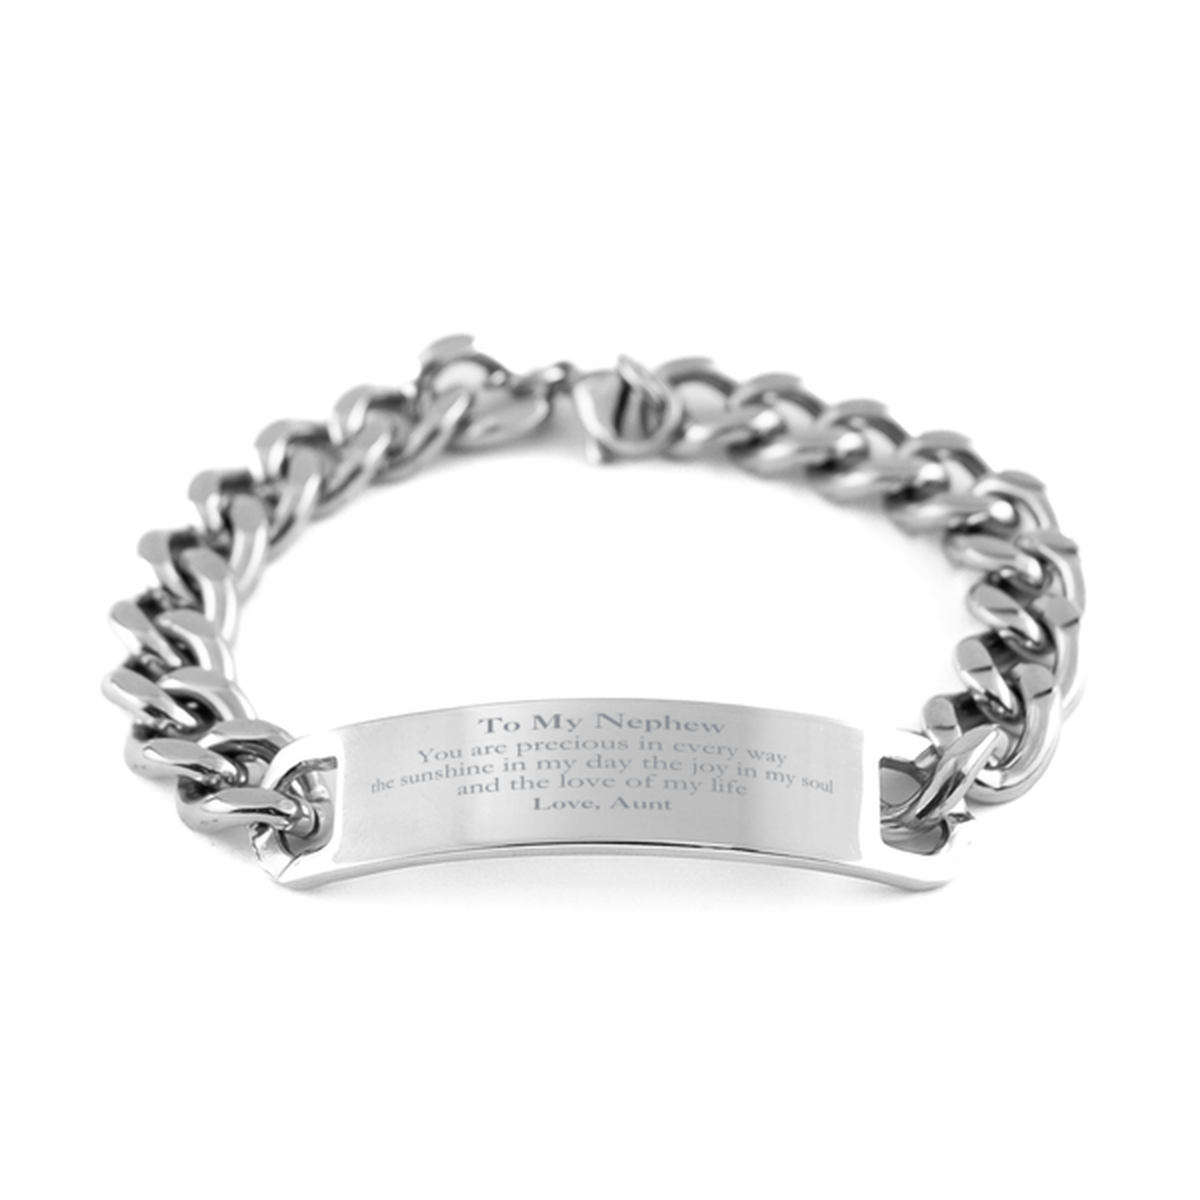 Graduation Gifts for Nephew Cuban Chain Stainless Steel Bracelet Present from Aunt, Christmas Nephew Birthday Gifts Nephew You are precious in every way the sunshine in my day. Love, Aunt